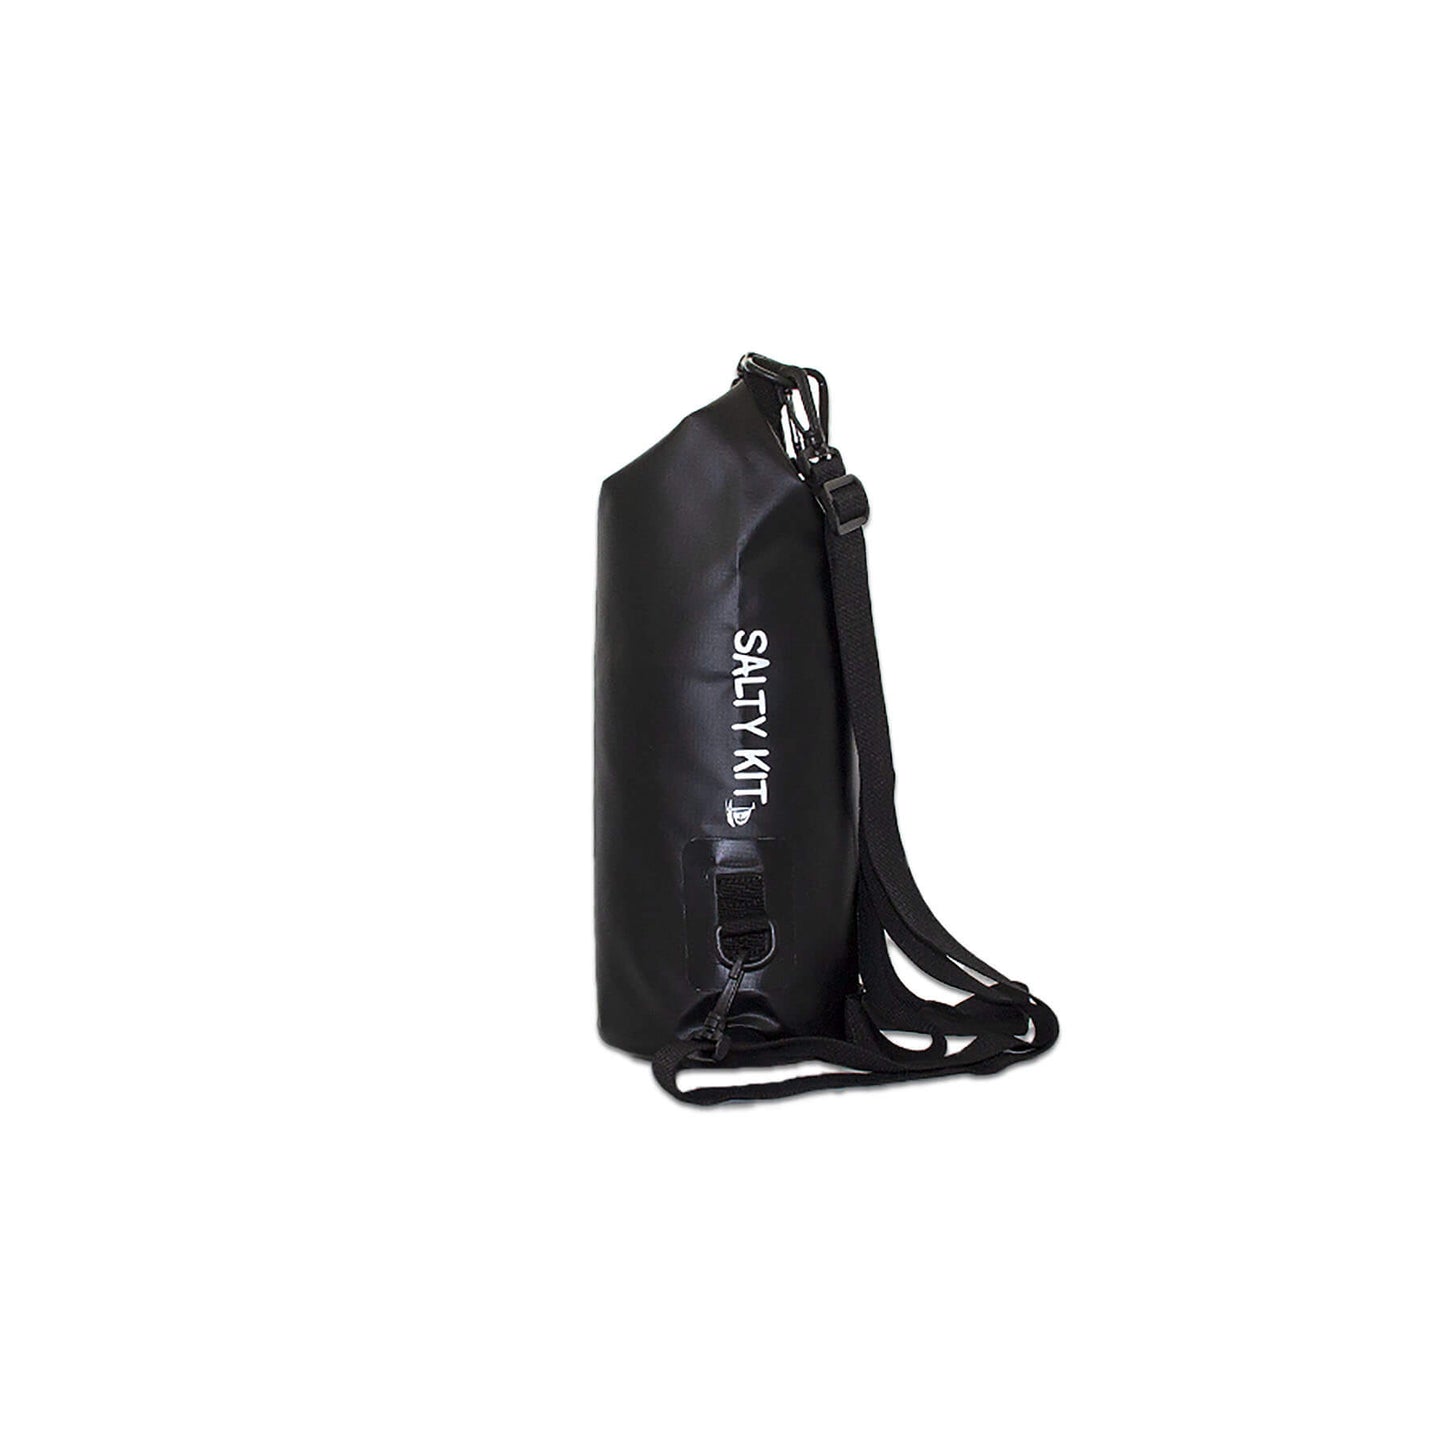 waterproof dry bag 5 litres a handy grab size with detachable straps and carabiner  in black the view of the side